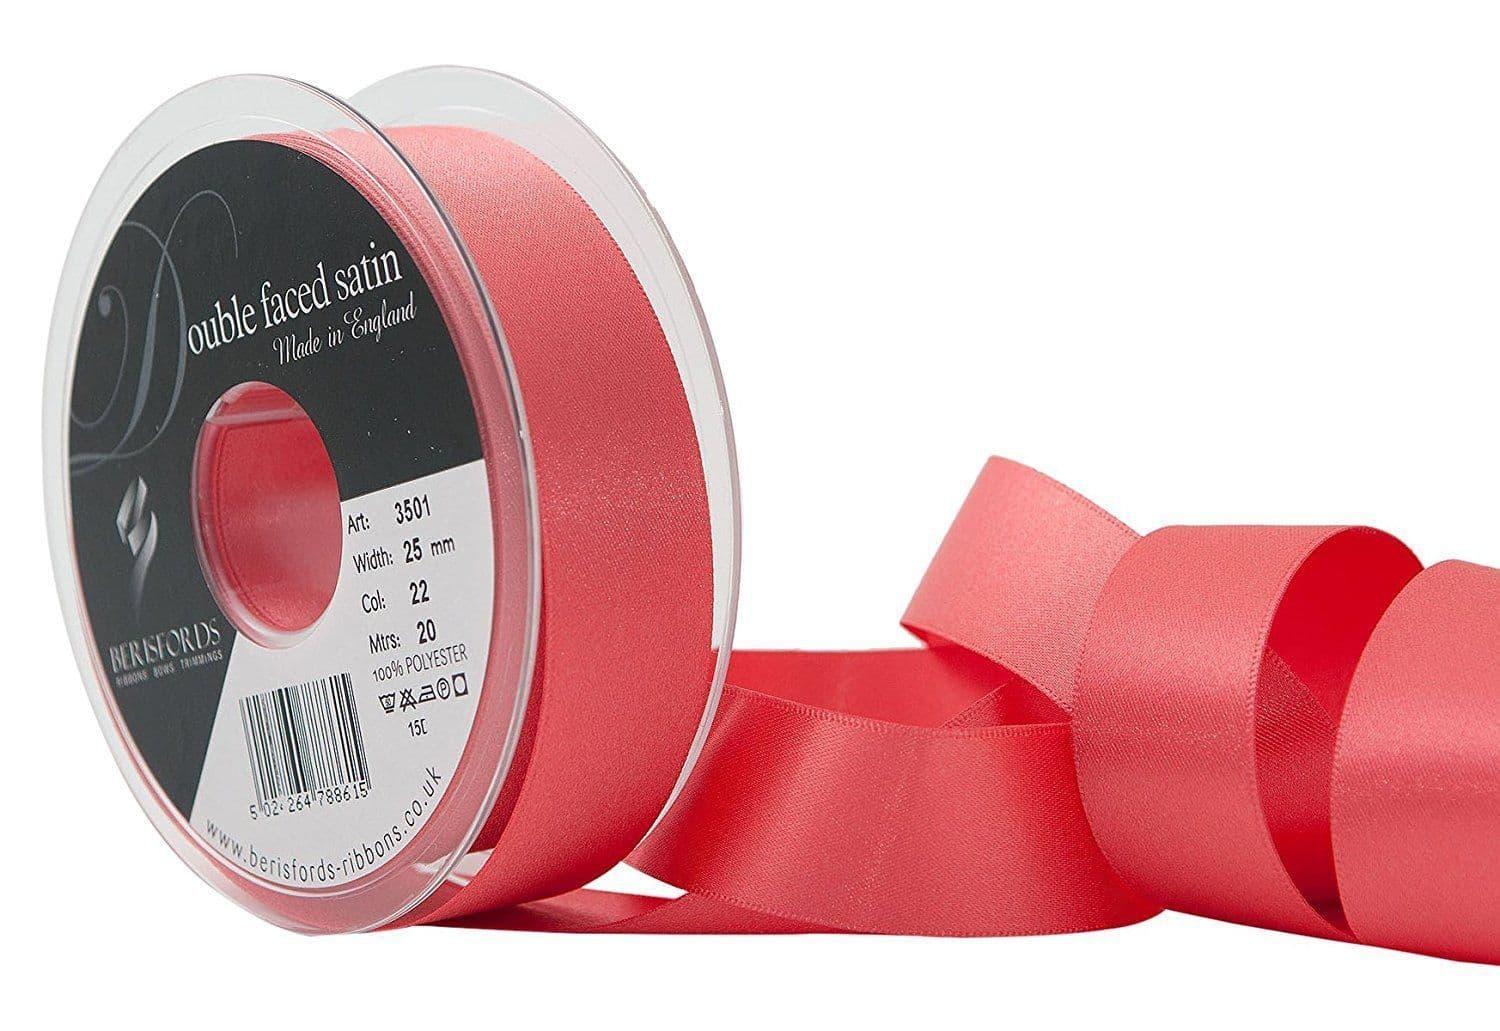 Christmas Red and Green Satin Ribbons Berisfords Trimmings 3 Metre